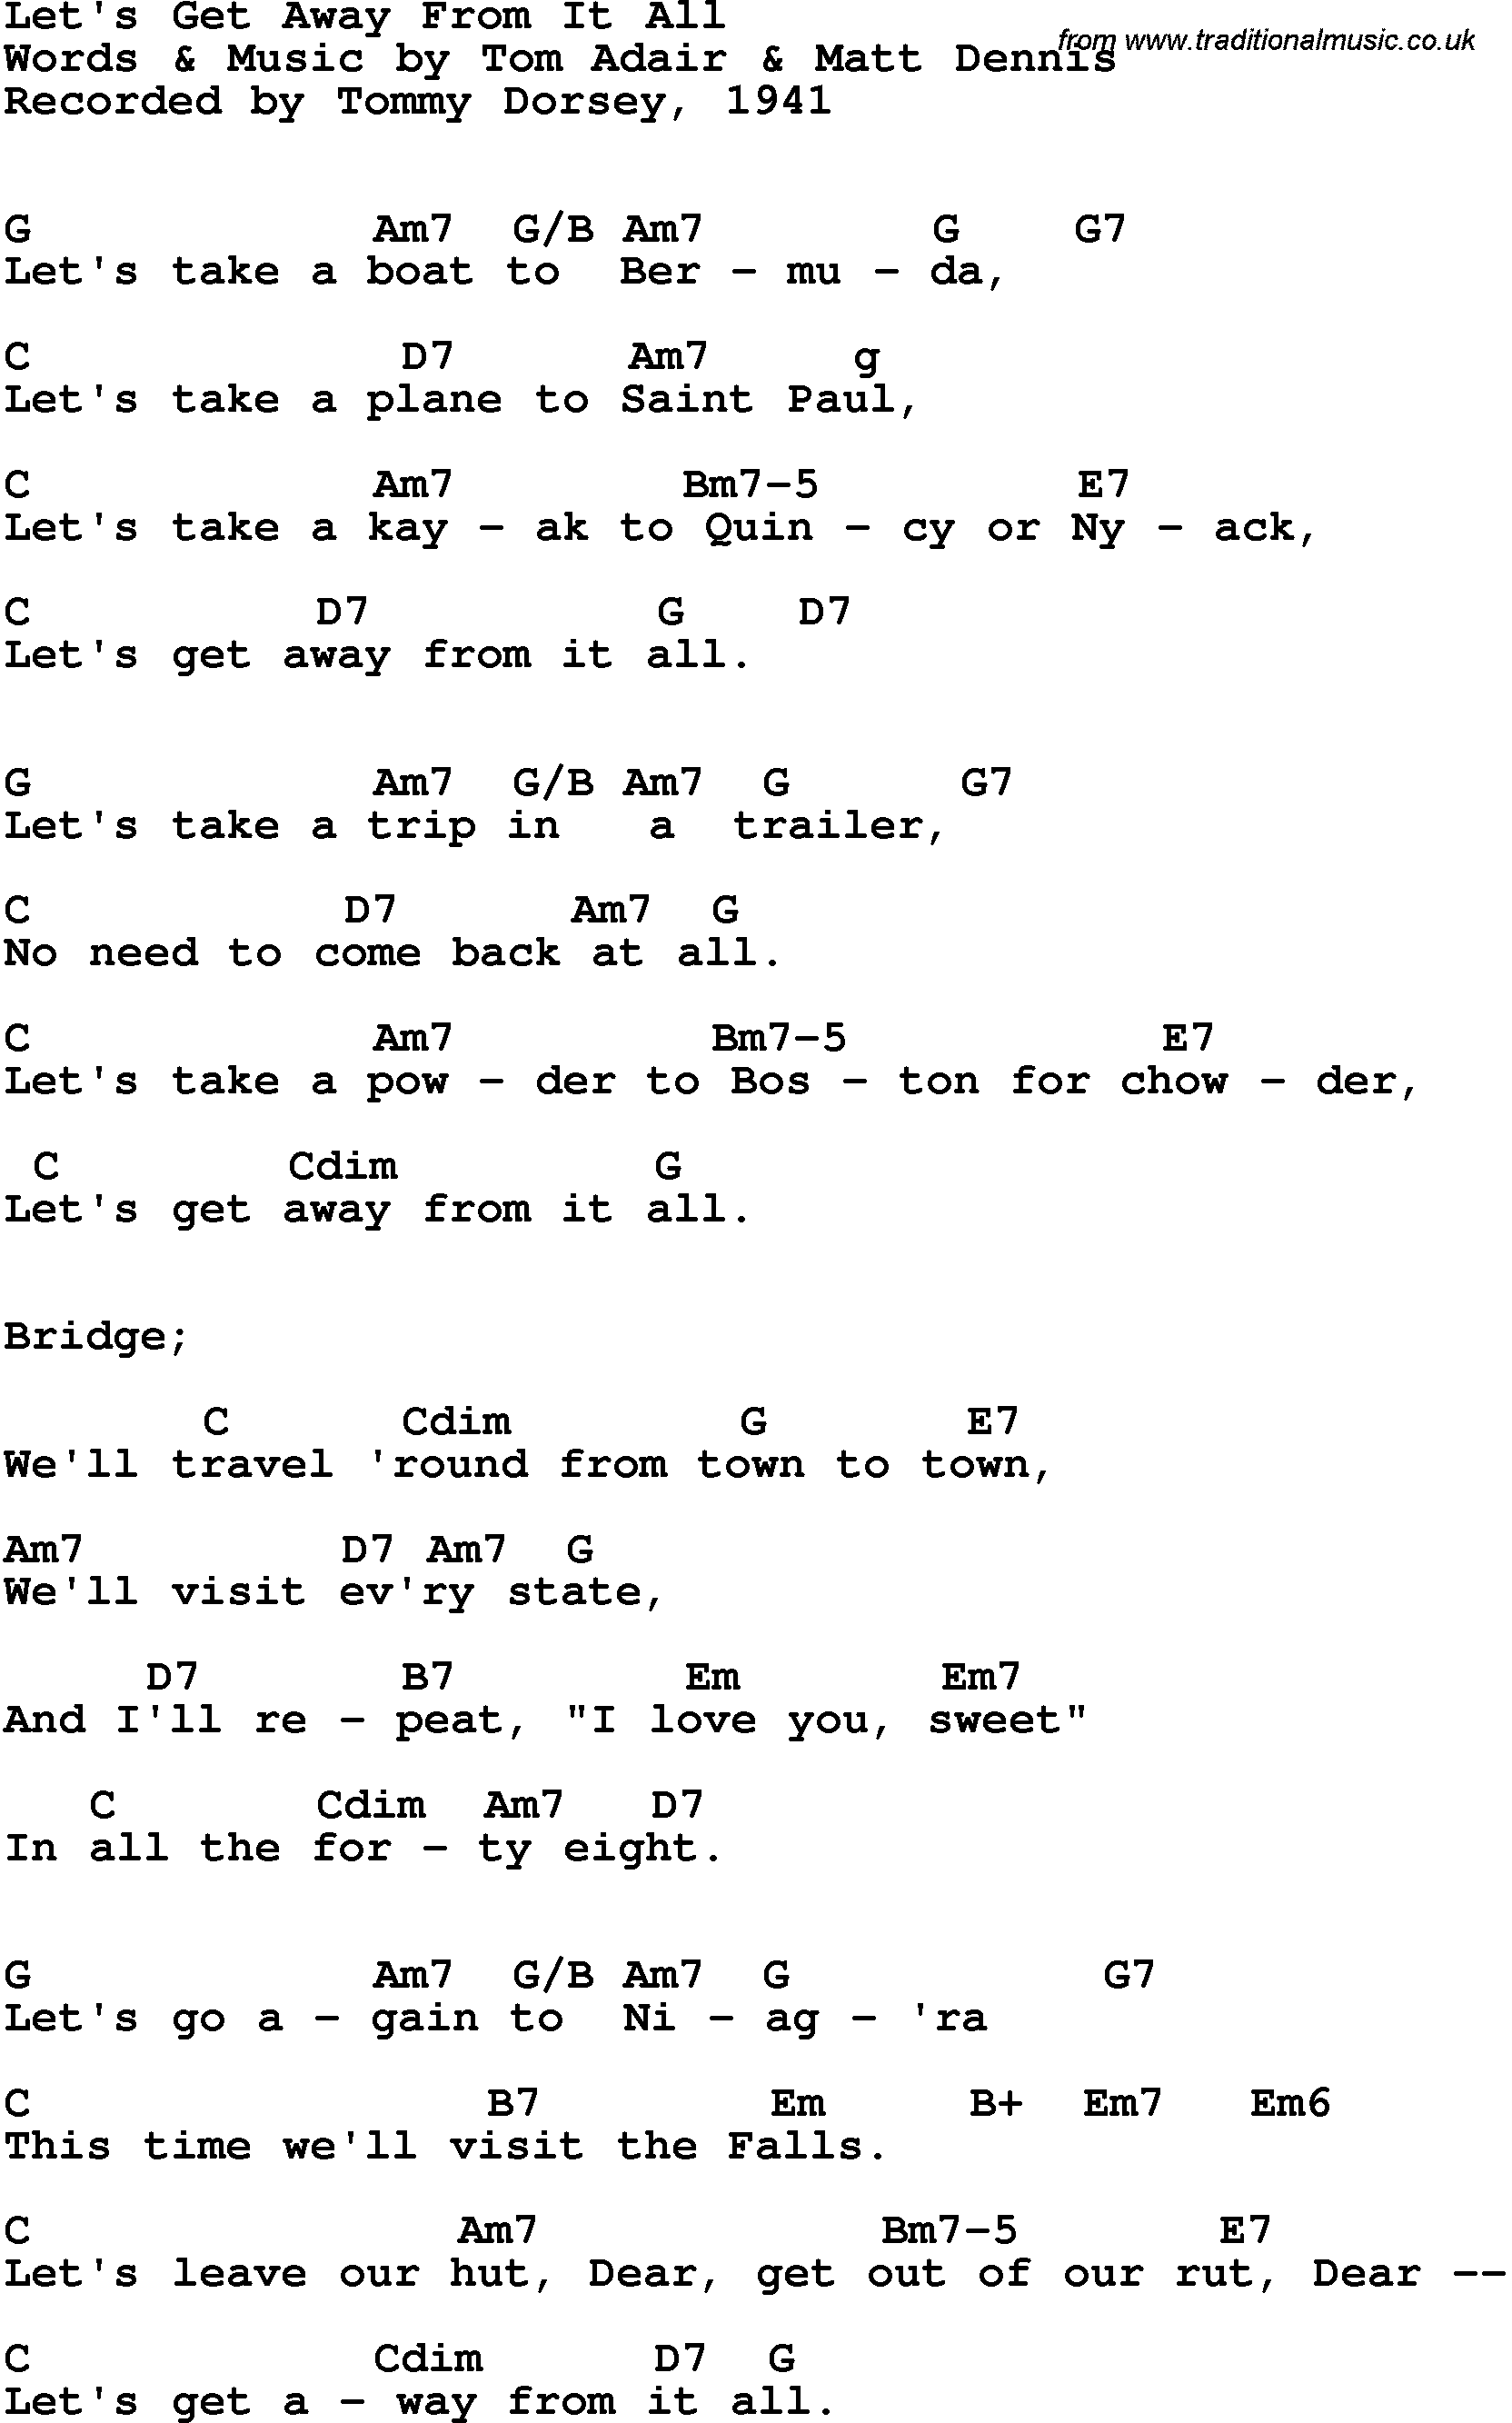 Song Lyrics with guitar chords for Let's Get Away From It All - Tommy Dorsey, 1940